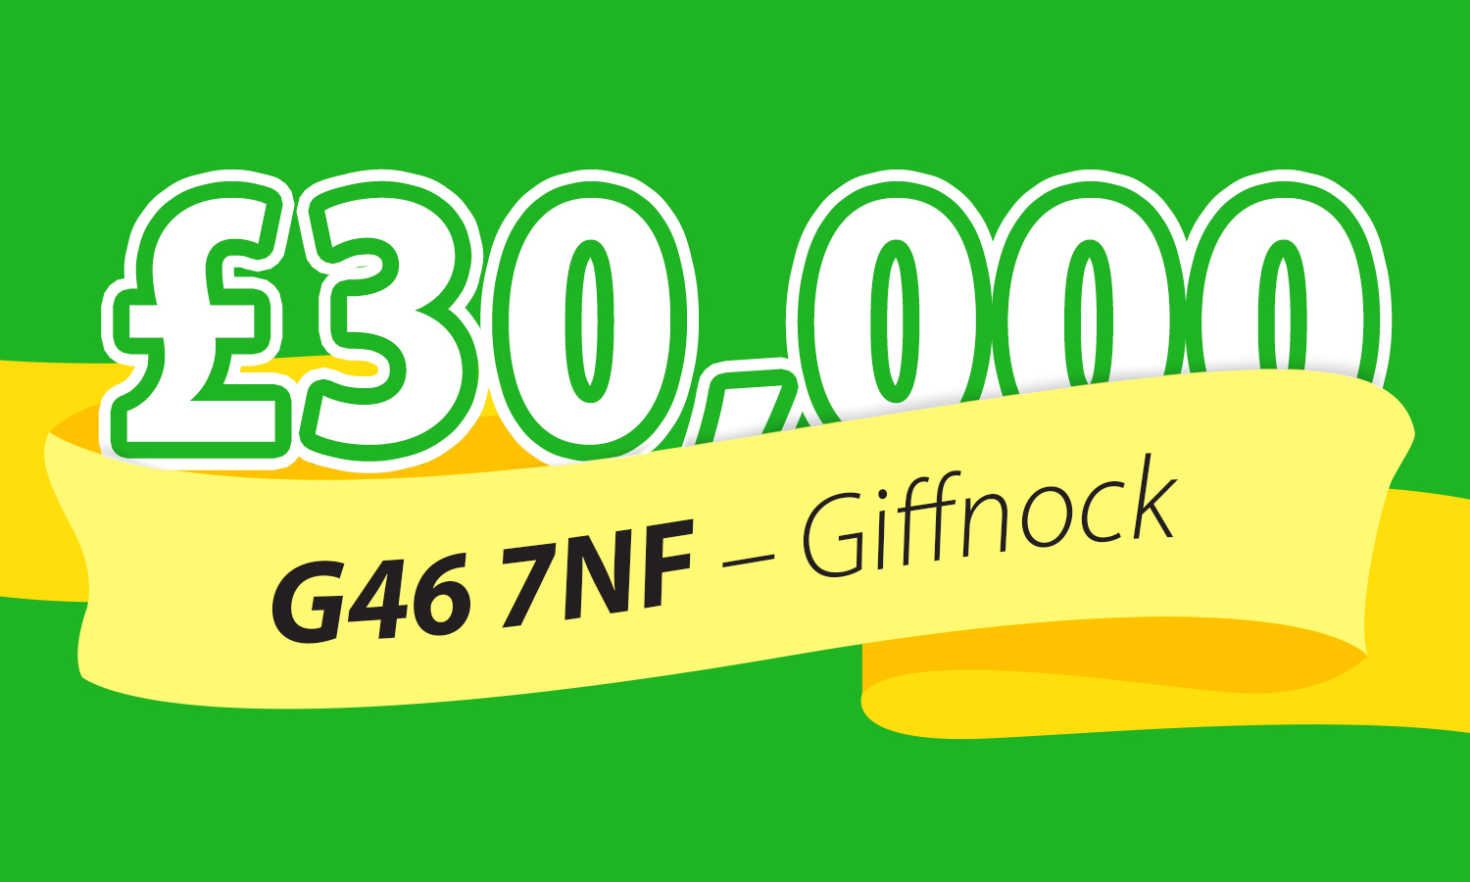 Players in Giffnock have won £30,000 per ticket - with one player scooping a massive £90,000